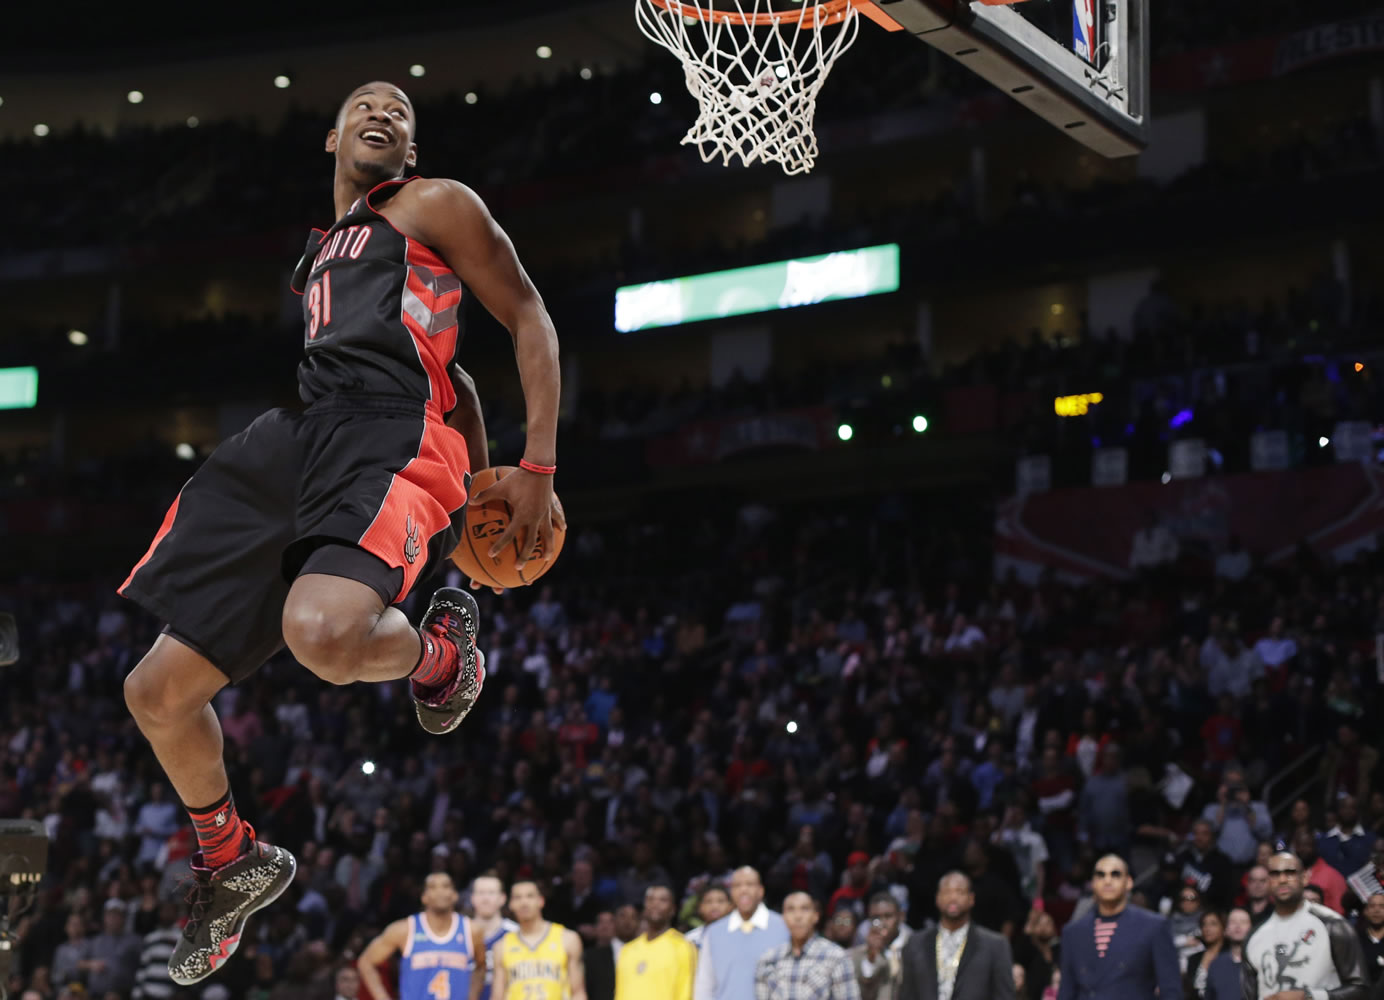 Terrence Ross of the Toronto Raptors won the slam dunk contest by circling the ball behind his back while executing a 360.